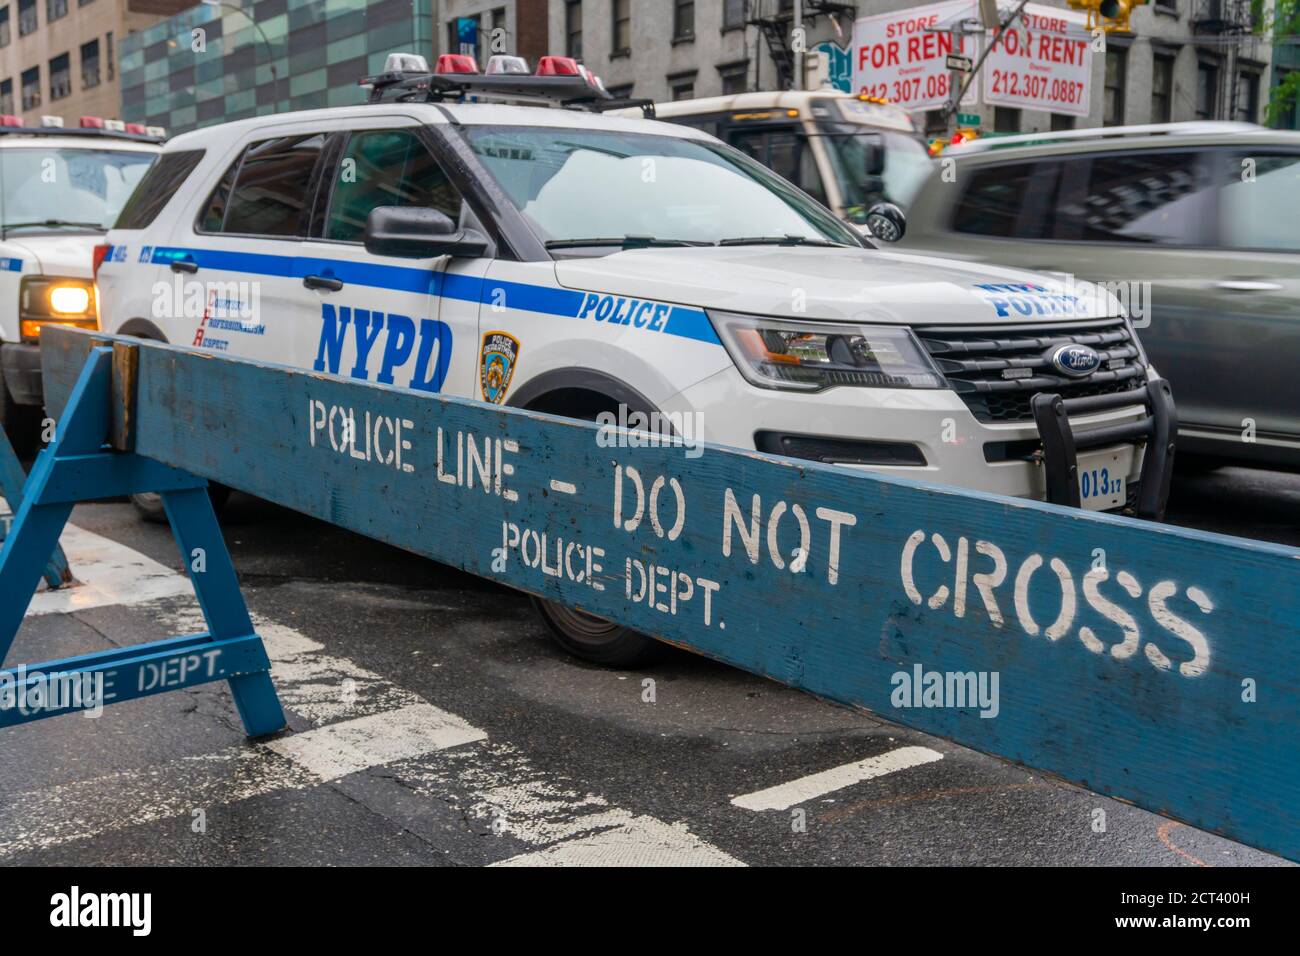 NYPD police vehicle and do not cross traffic barricade Stock Photo